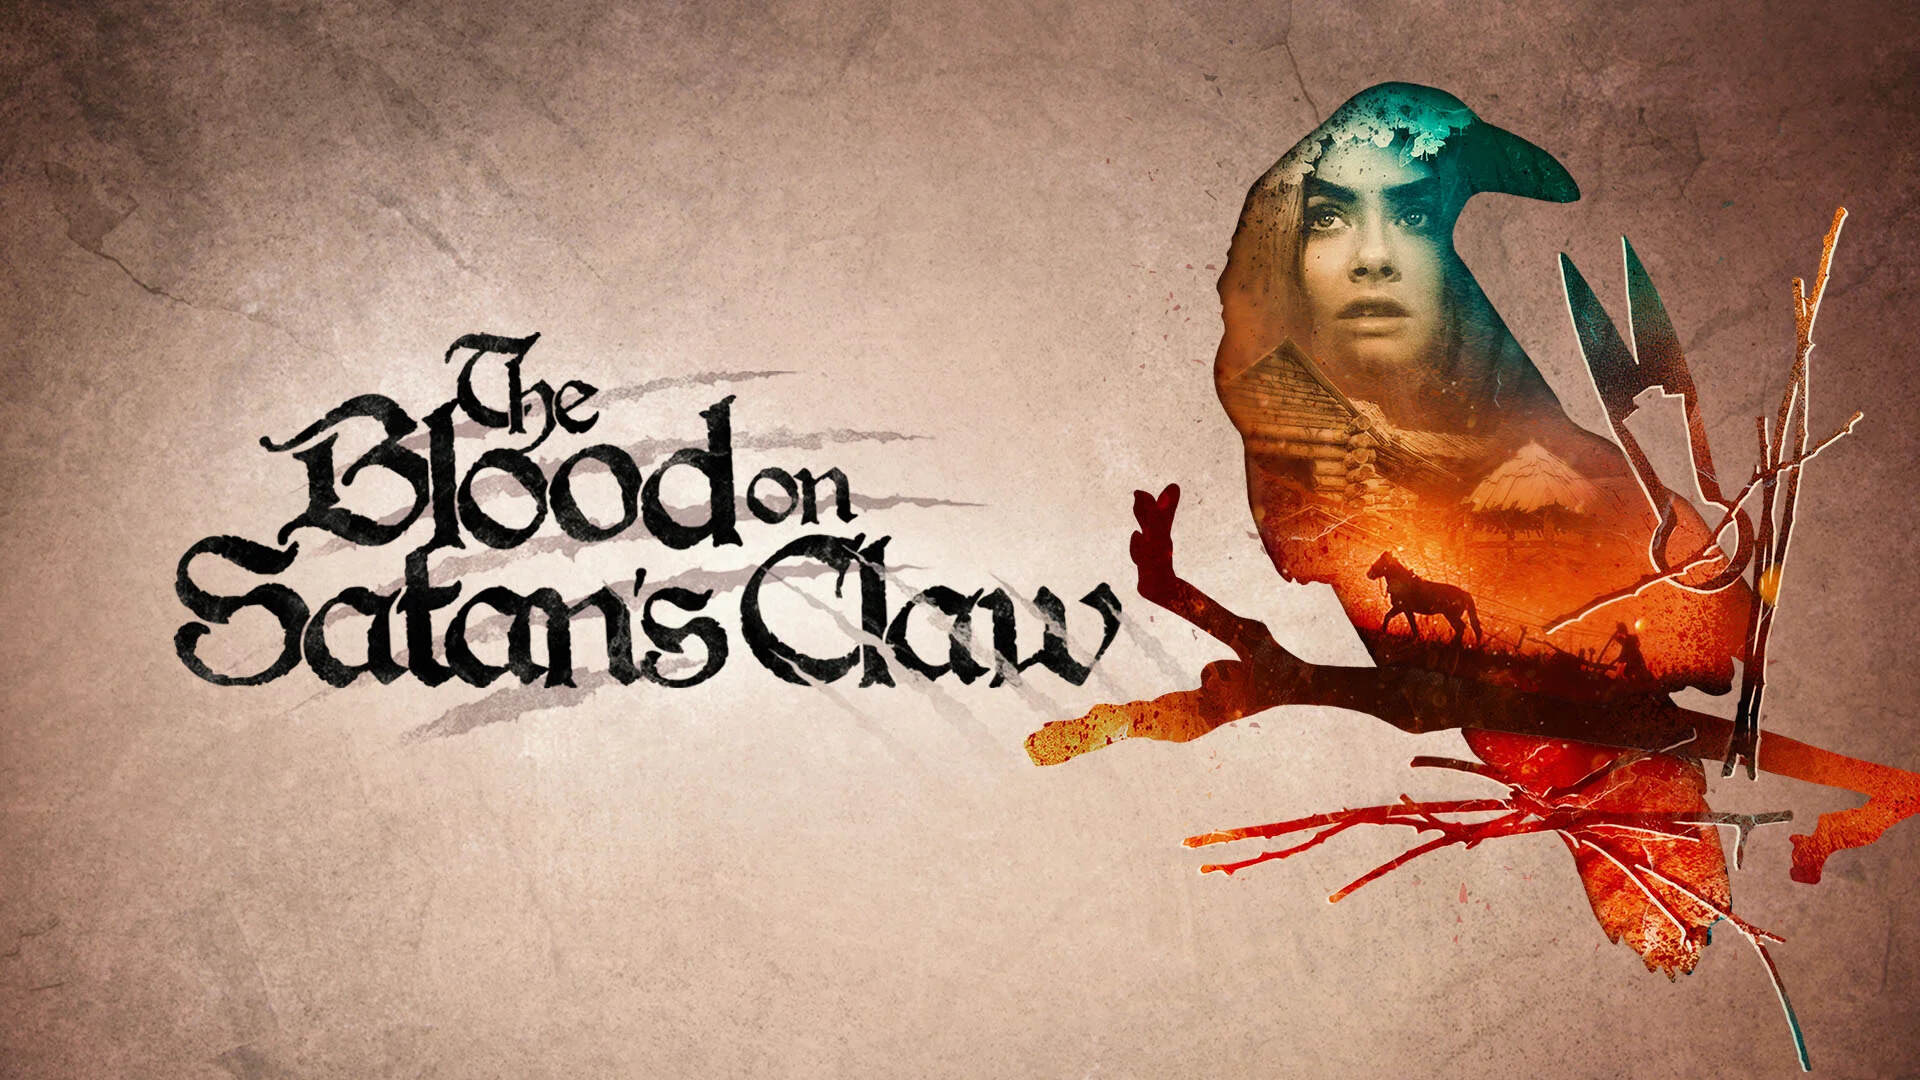 37-facts-about-the-movie-blood-on-satans-claw